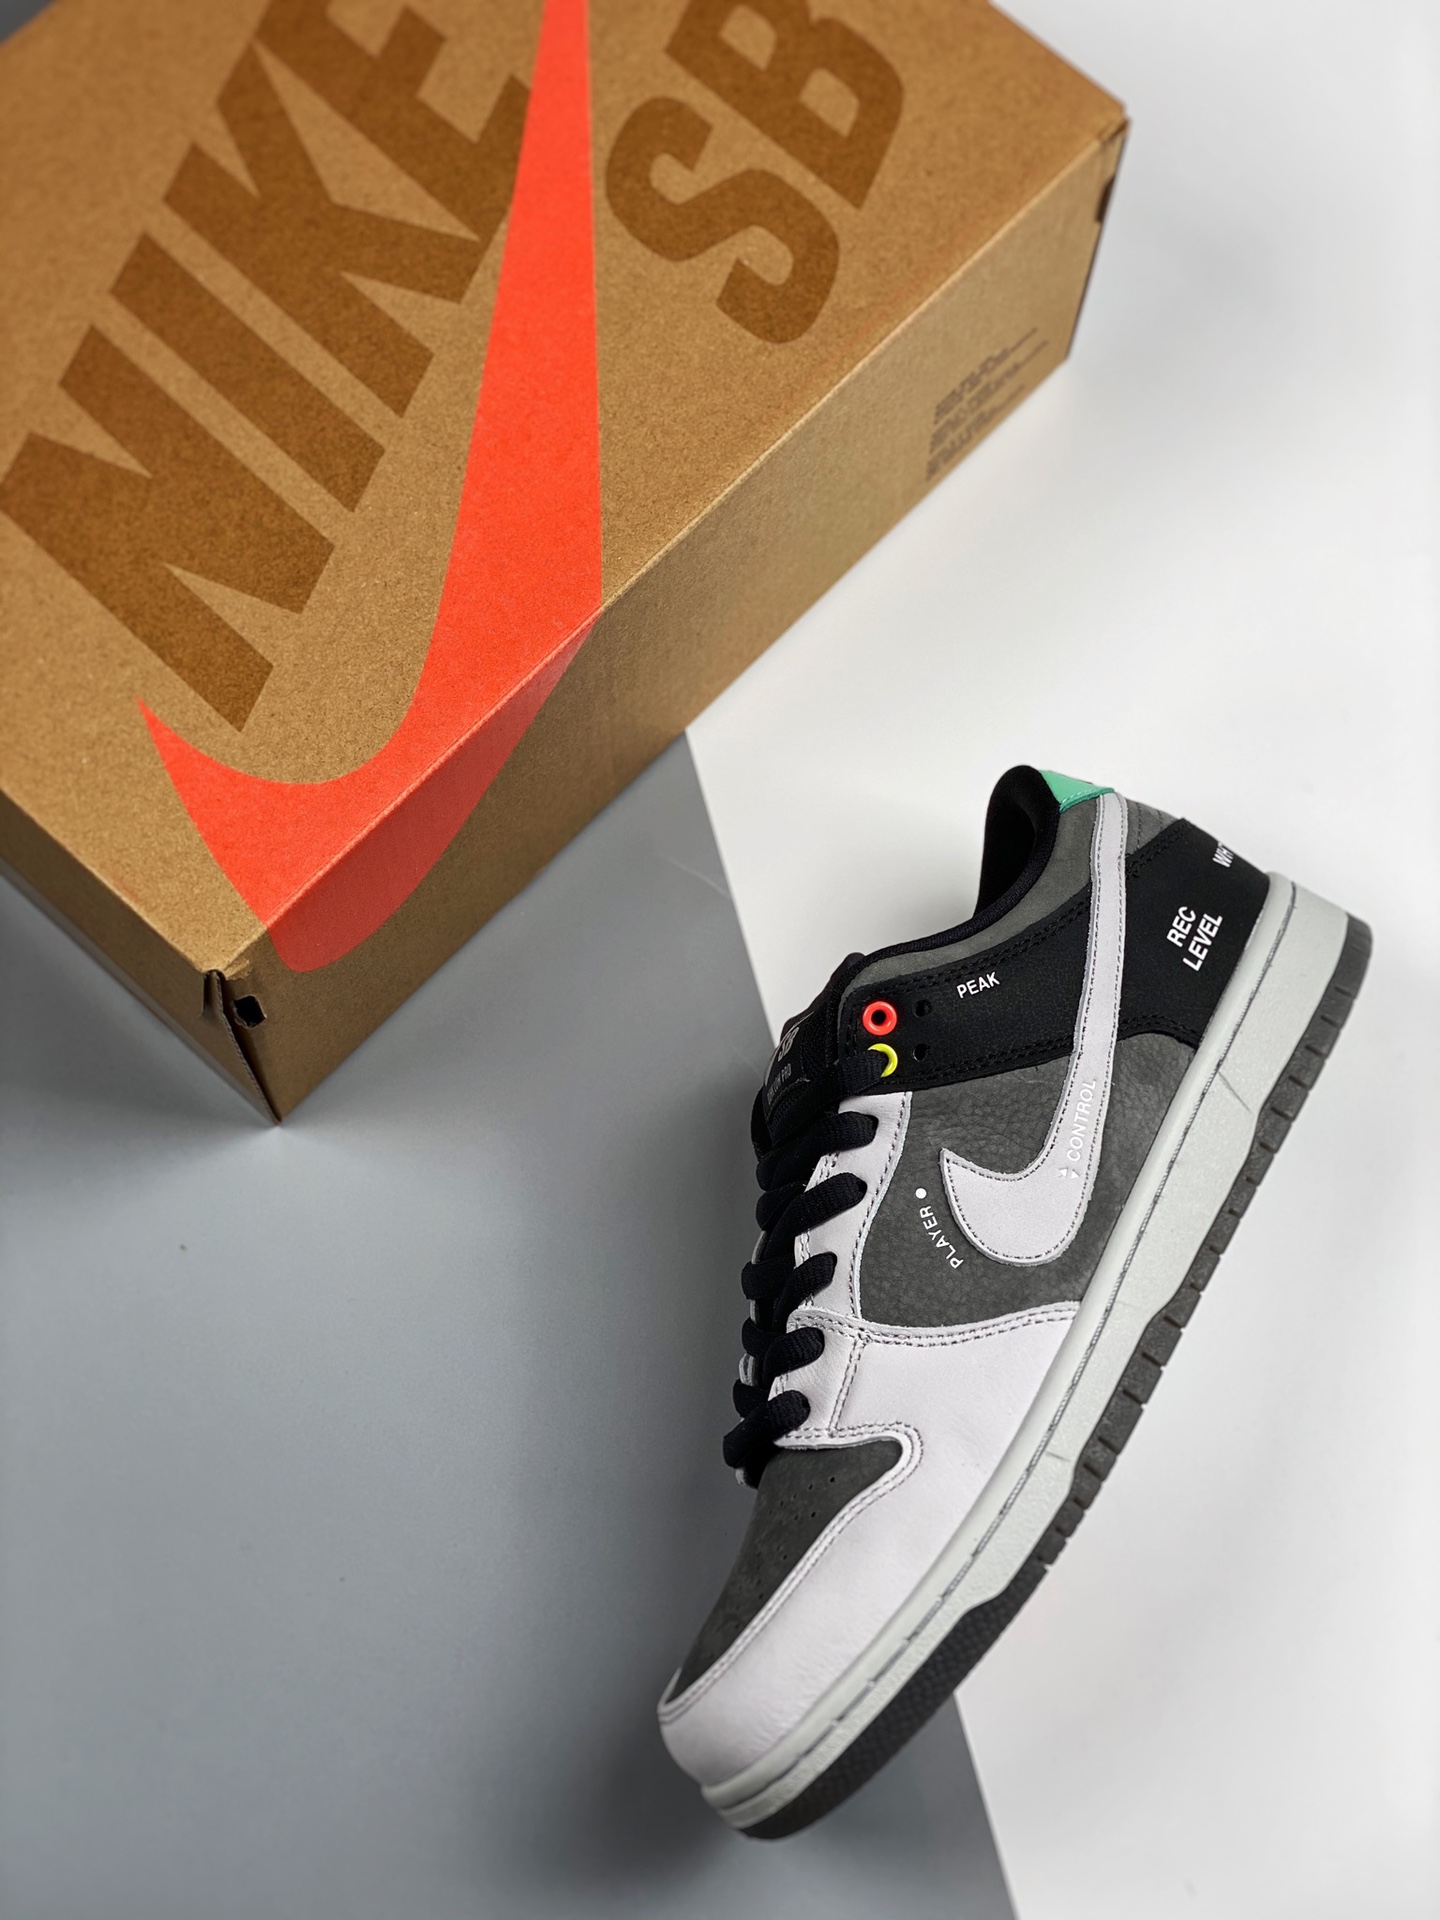 Nike SB Dunk Low “Camcorder” CV1659-001 For Sale – Sneaker Hello